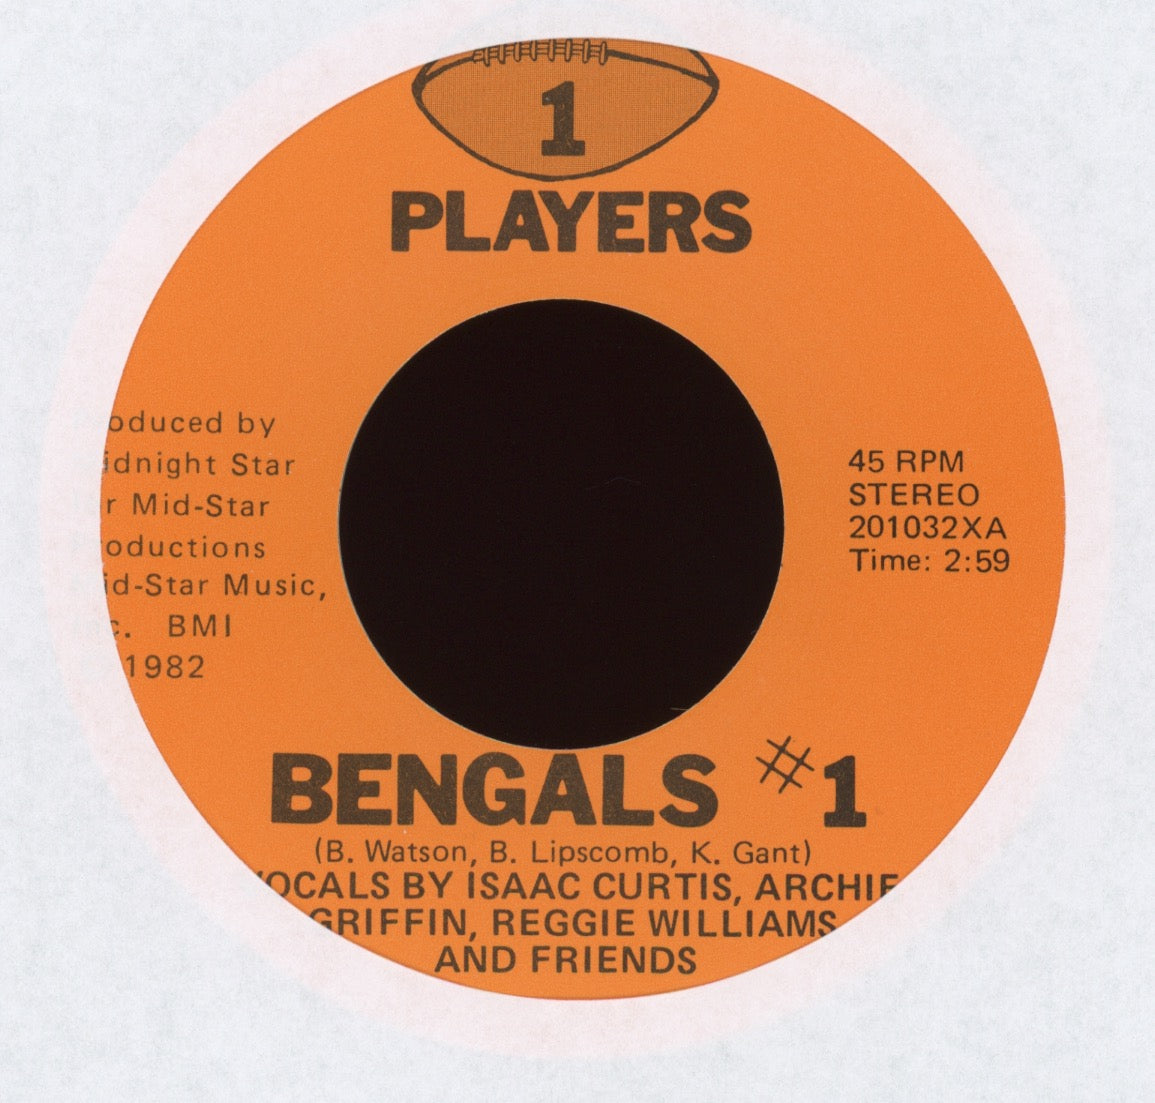 Players - Bengals #1 Private Press Midnight Star